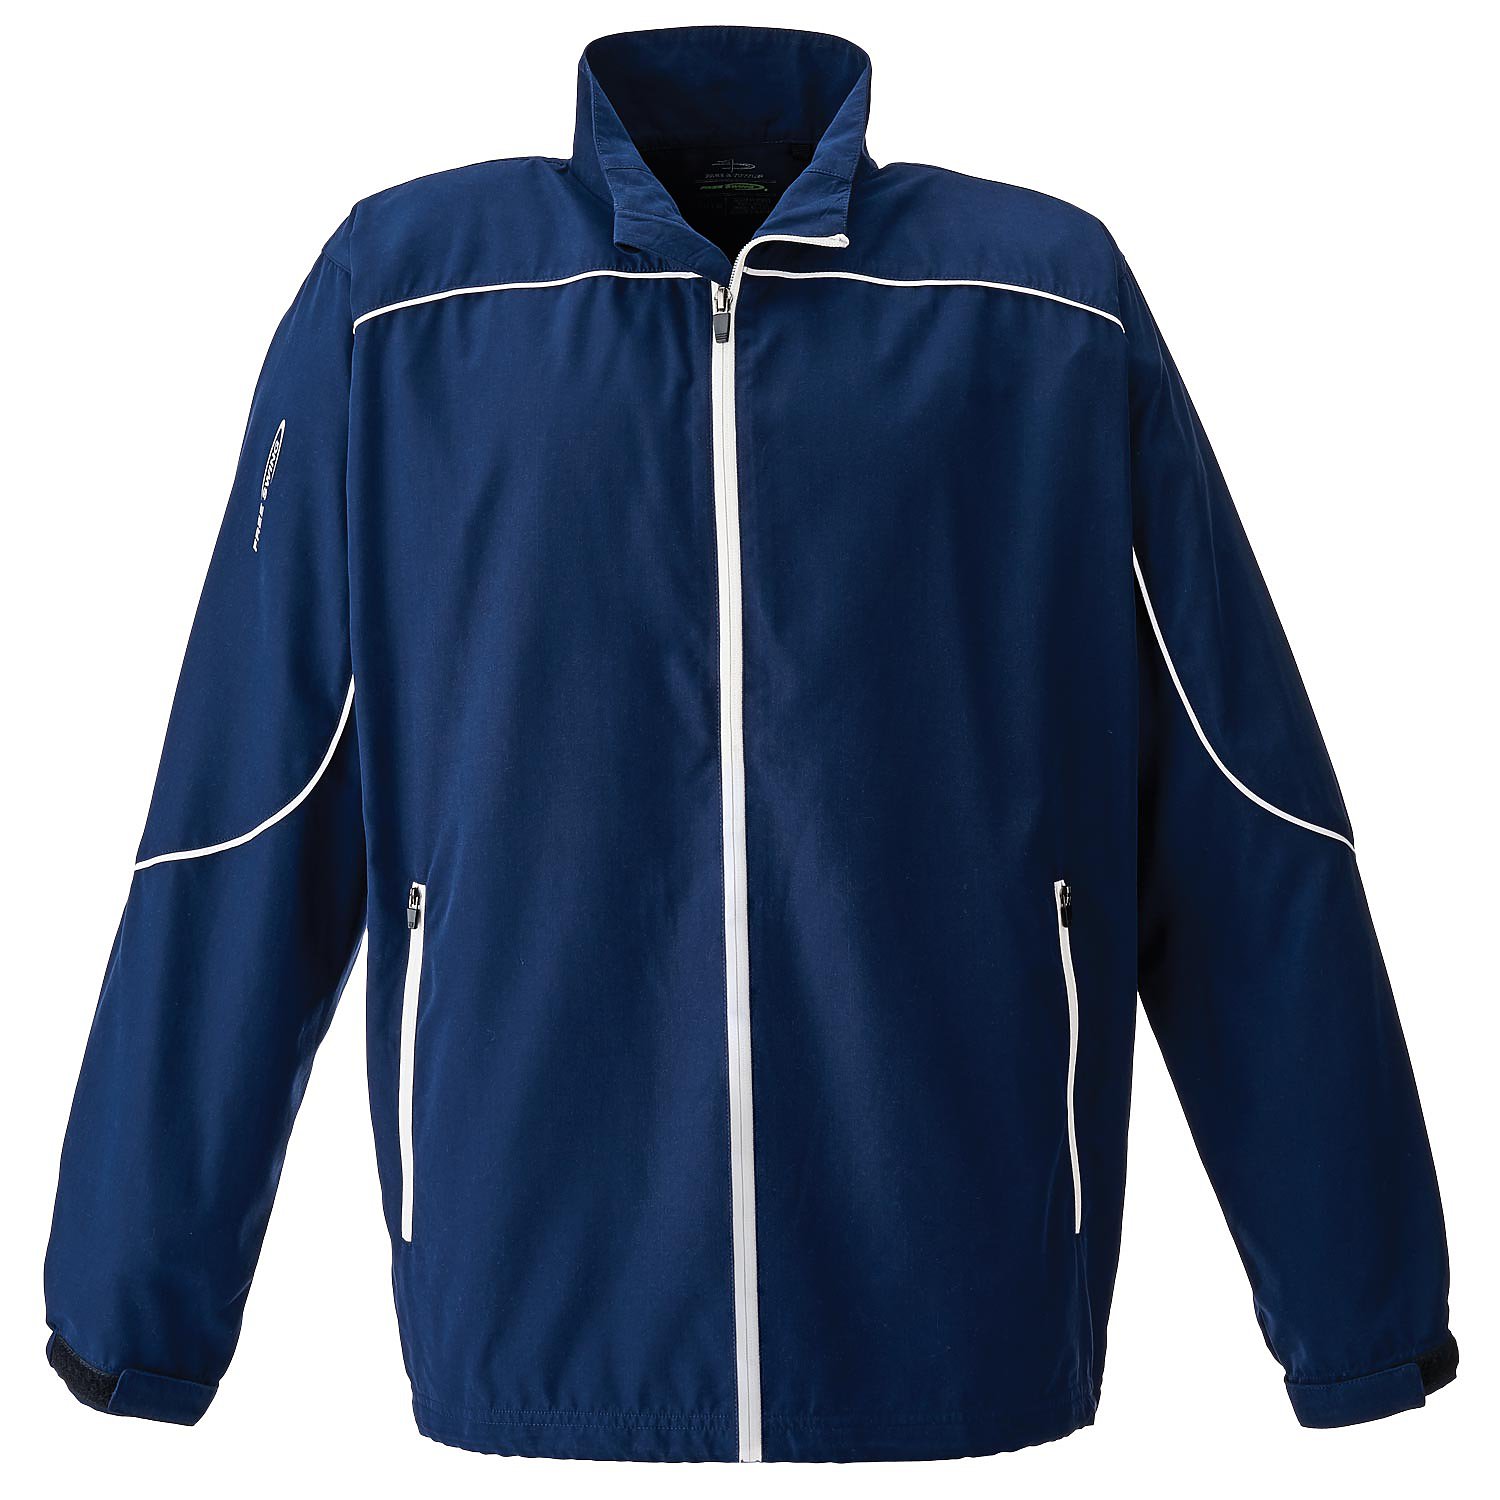 Page & Tuttle P1988 - Men's Piped Full-Zip Long Sleeve Windshirt